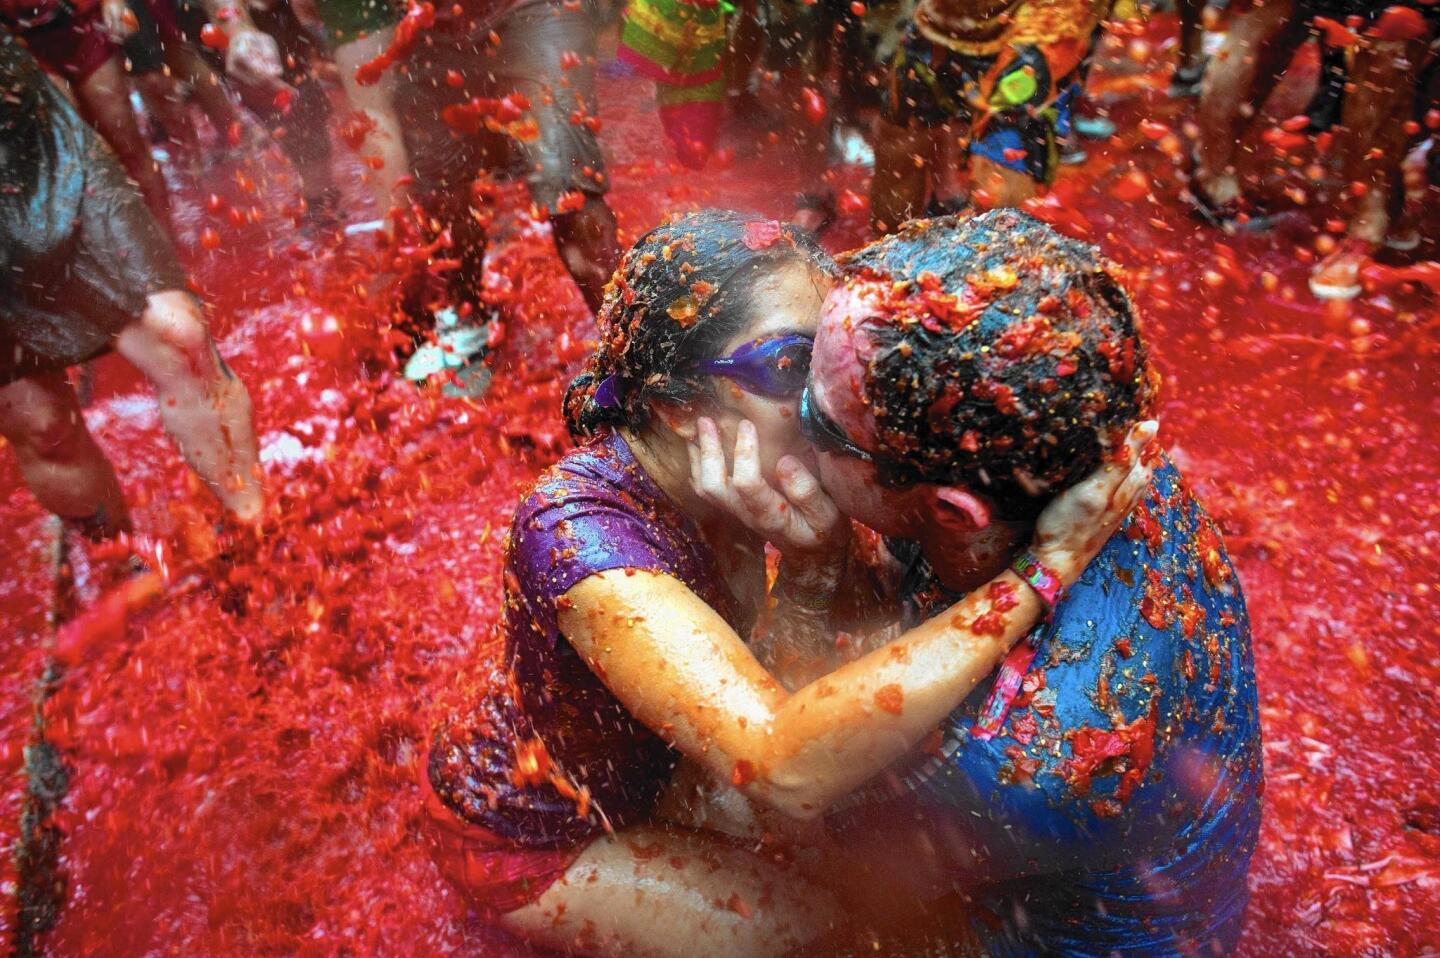 Two revelers kiss while covered in tomato pulp during the annual Tomatina festival in Bunol, Spain, where the world’s biggest tomato fight is held annually.